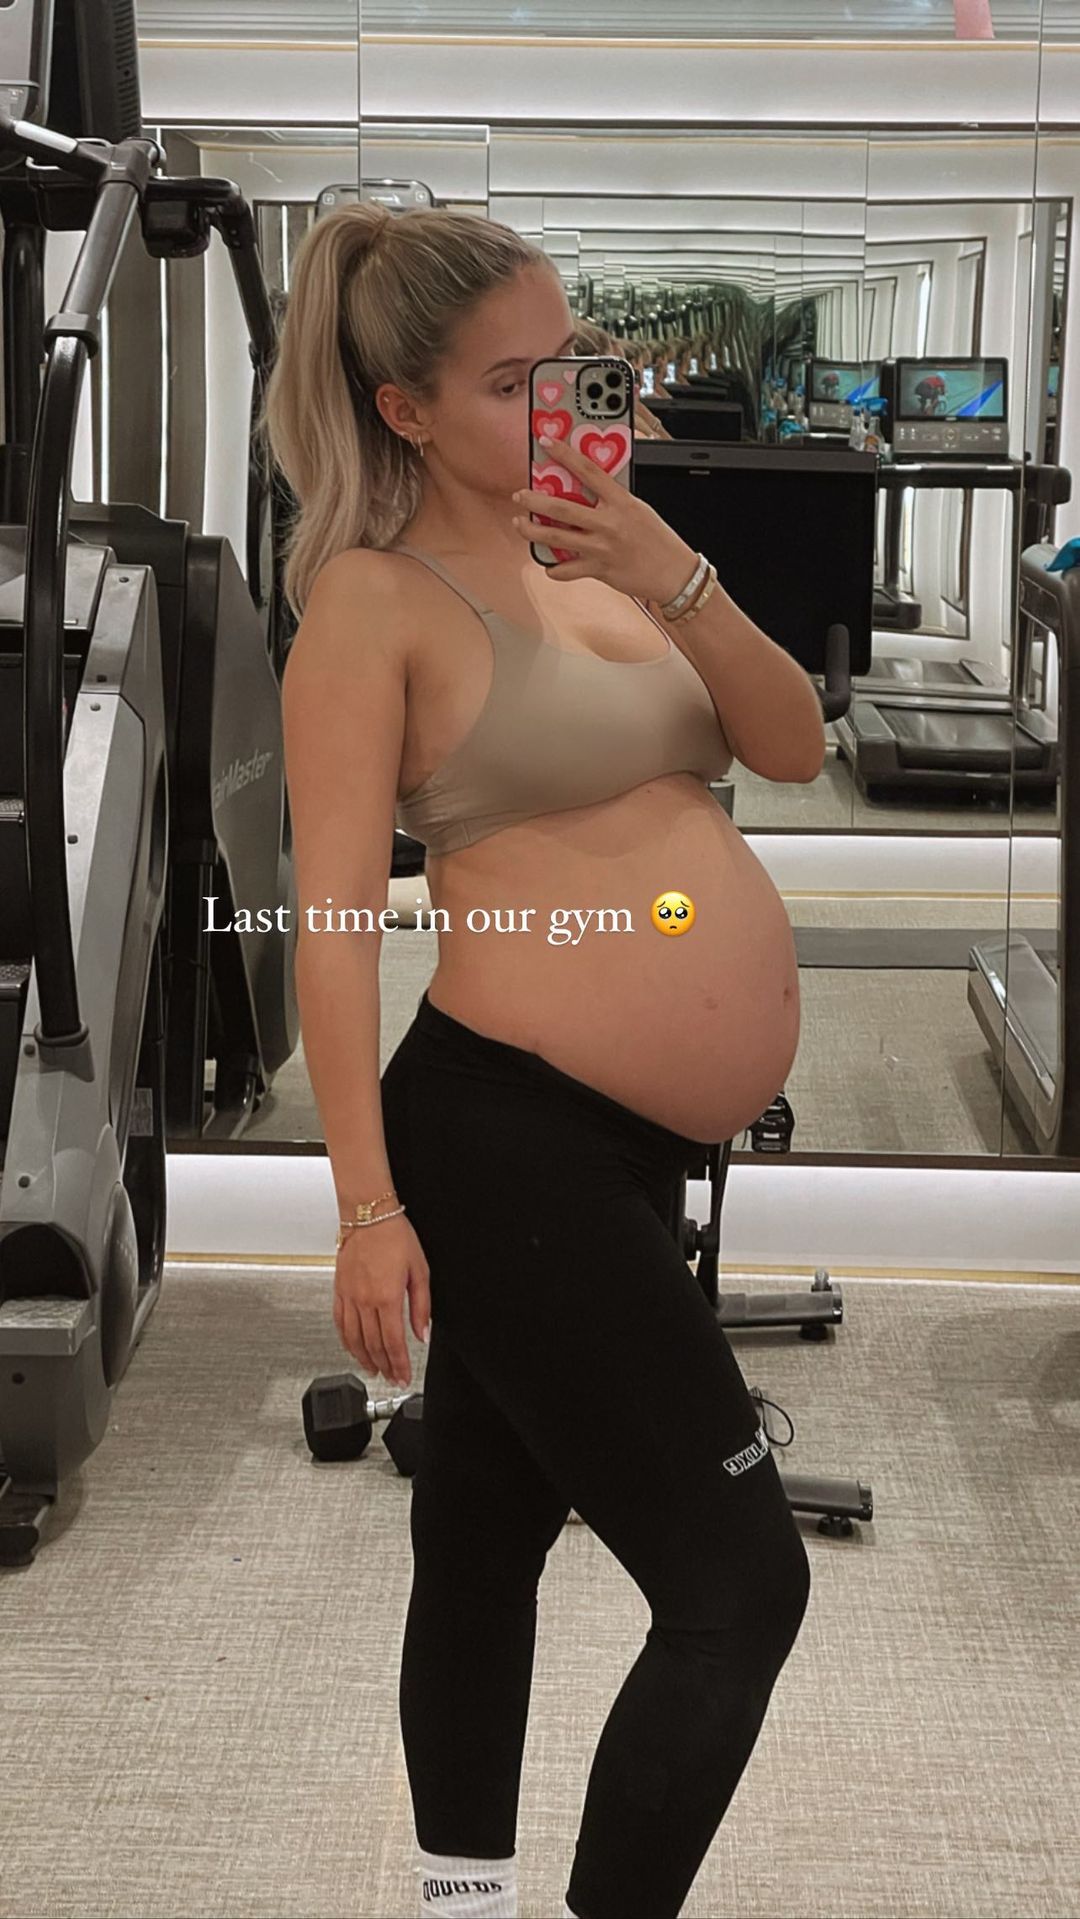 Molly Mae claims her bum has ‘tripled in size’ as she returns to the gym for first time since giving birth